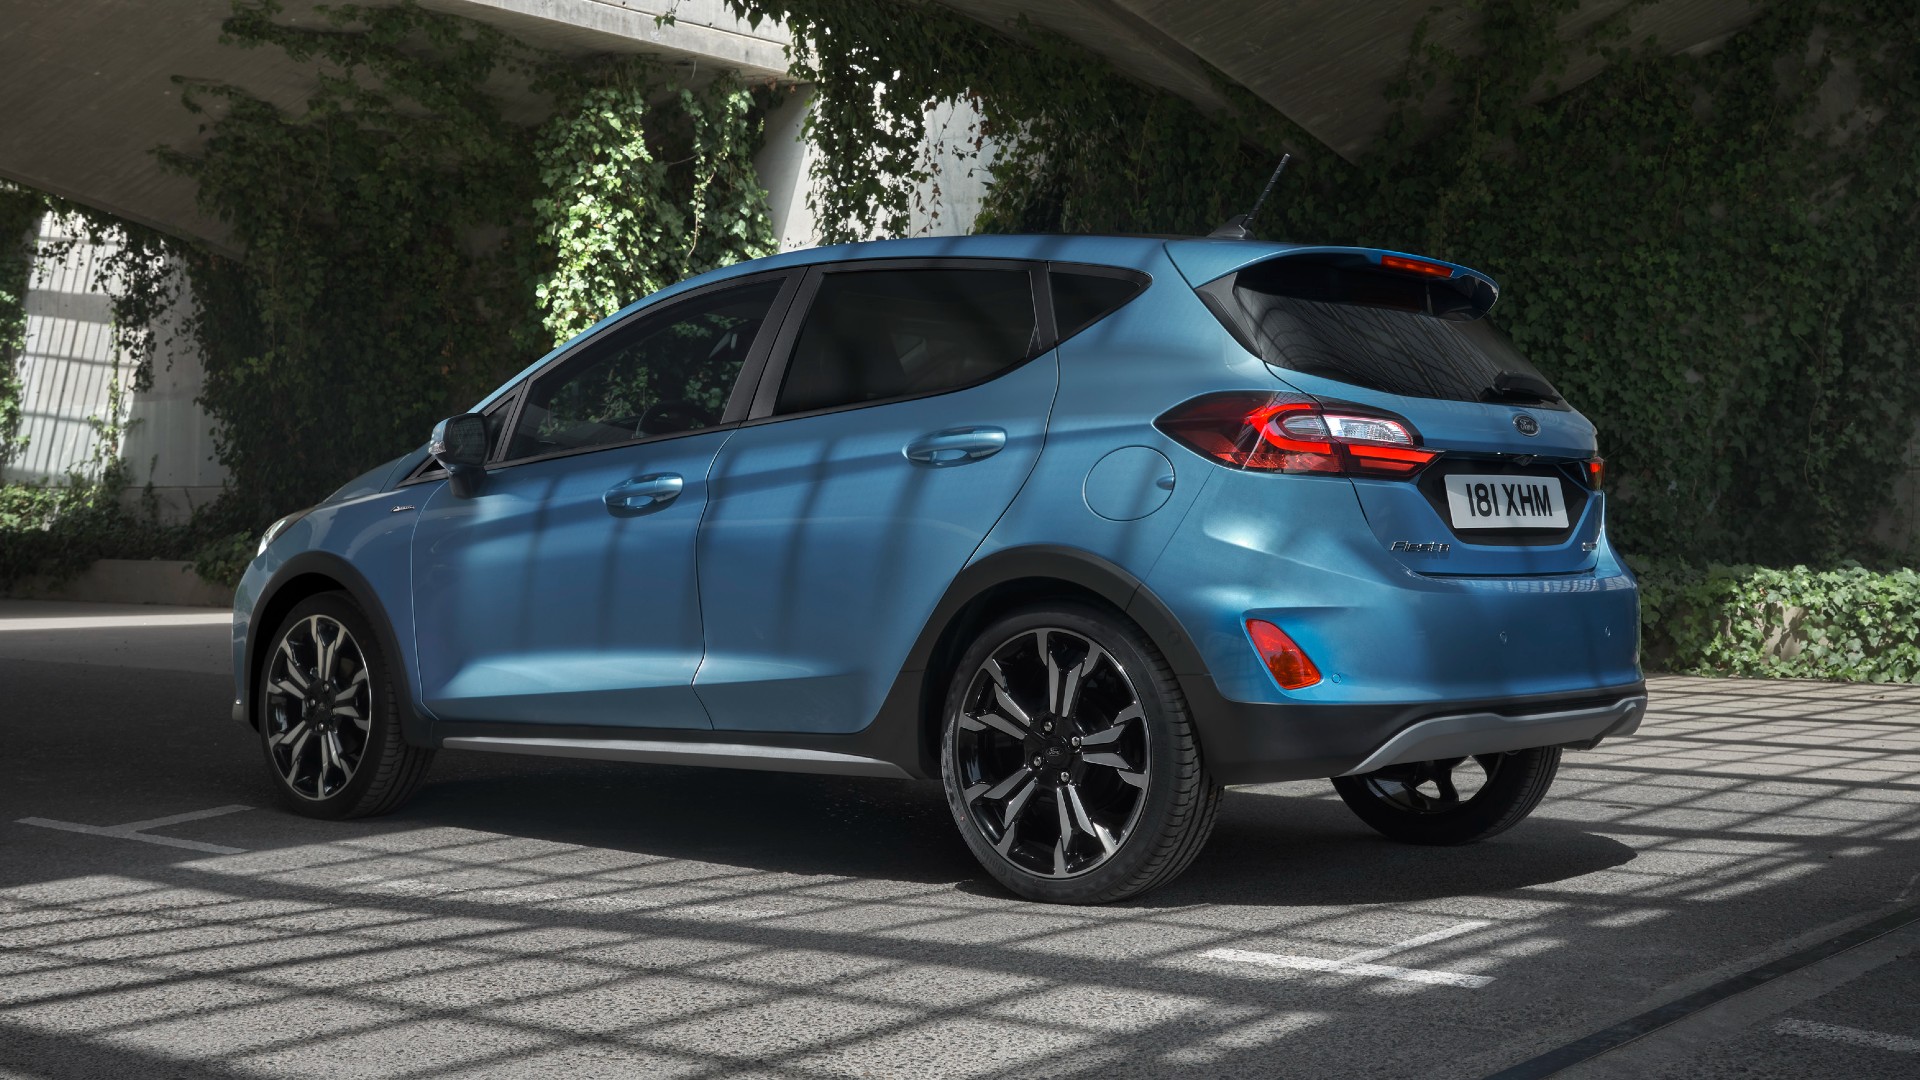 2019 Ford Fiesta Prices Reviews and Photos  MotorTrend